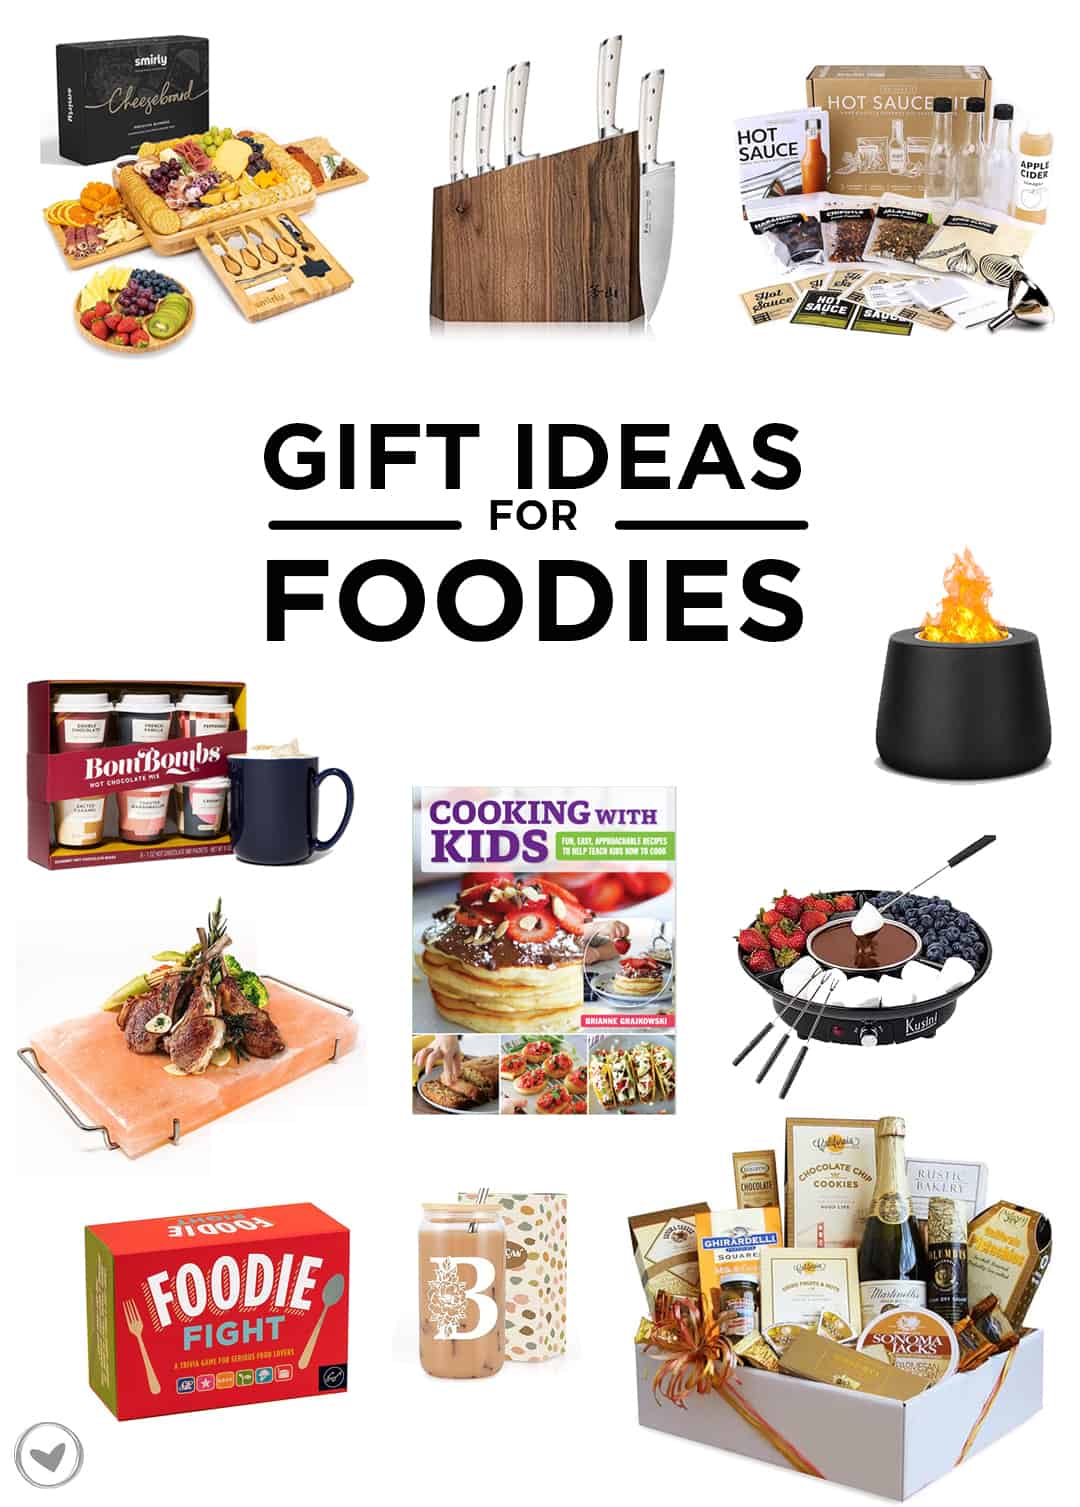 Gift Ideas for Foodies